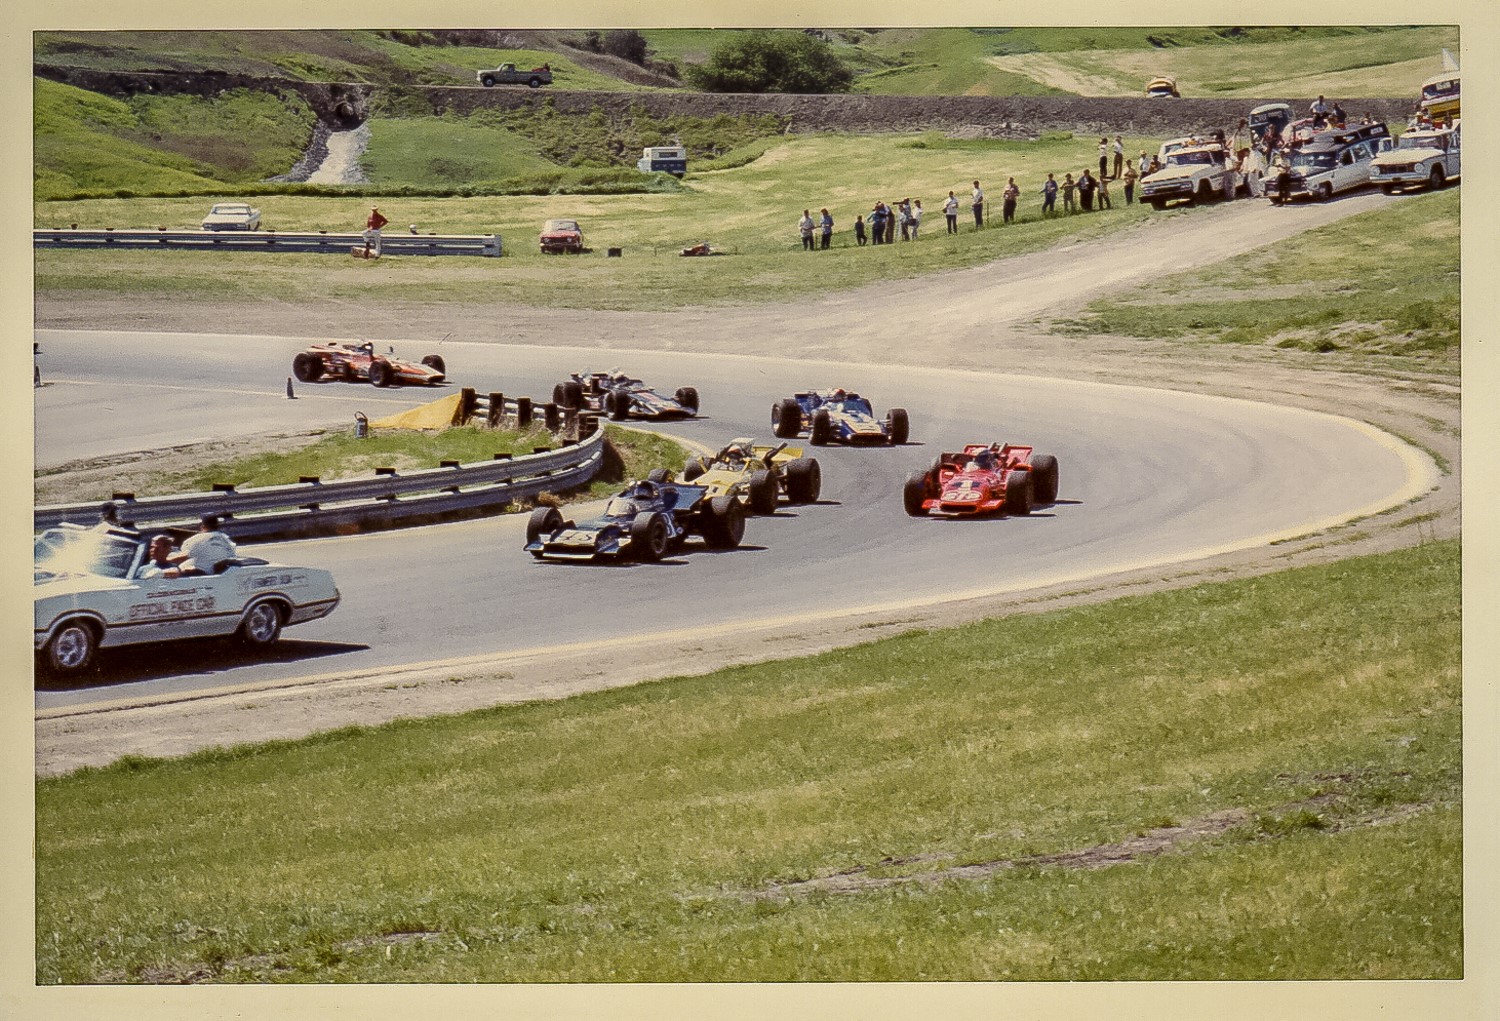 Pace Lap - Andretti on pole, Gurney outside